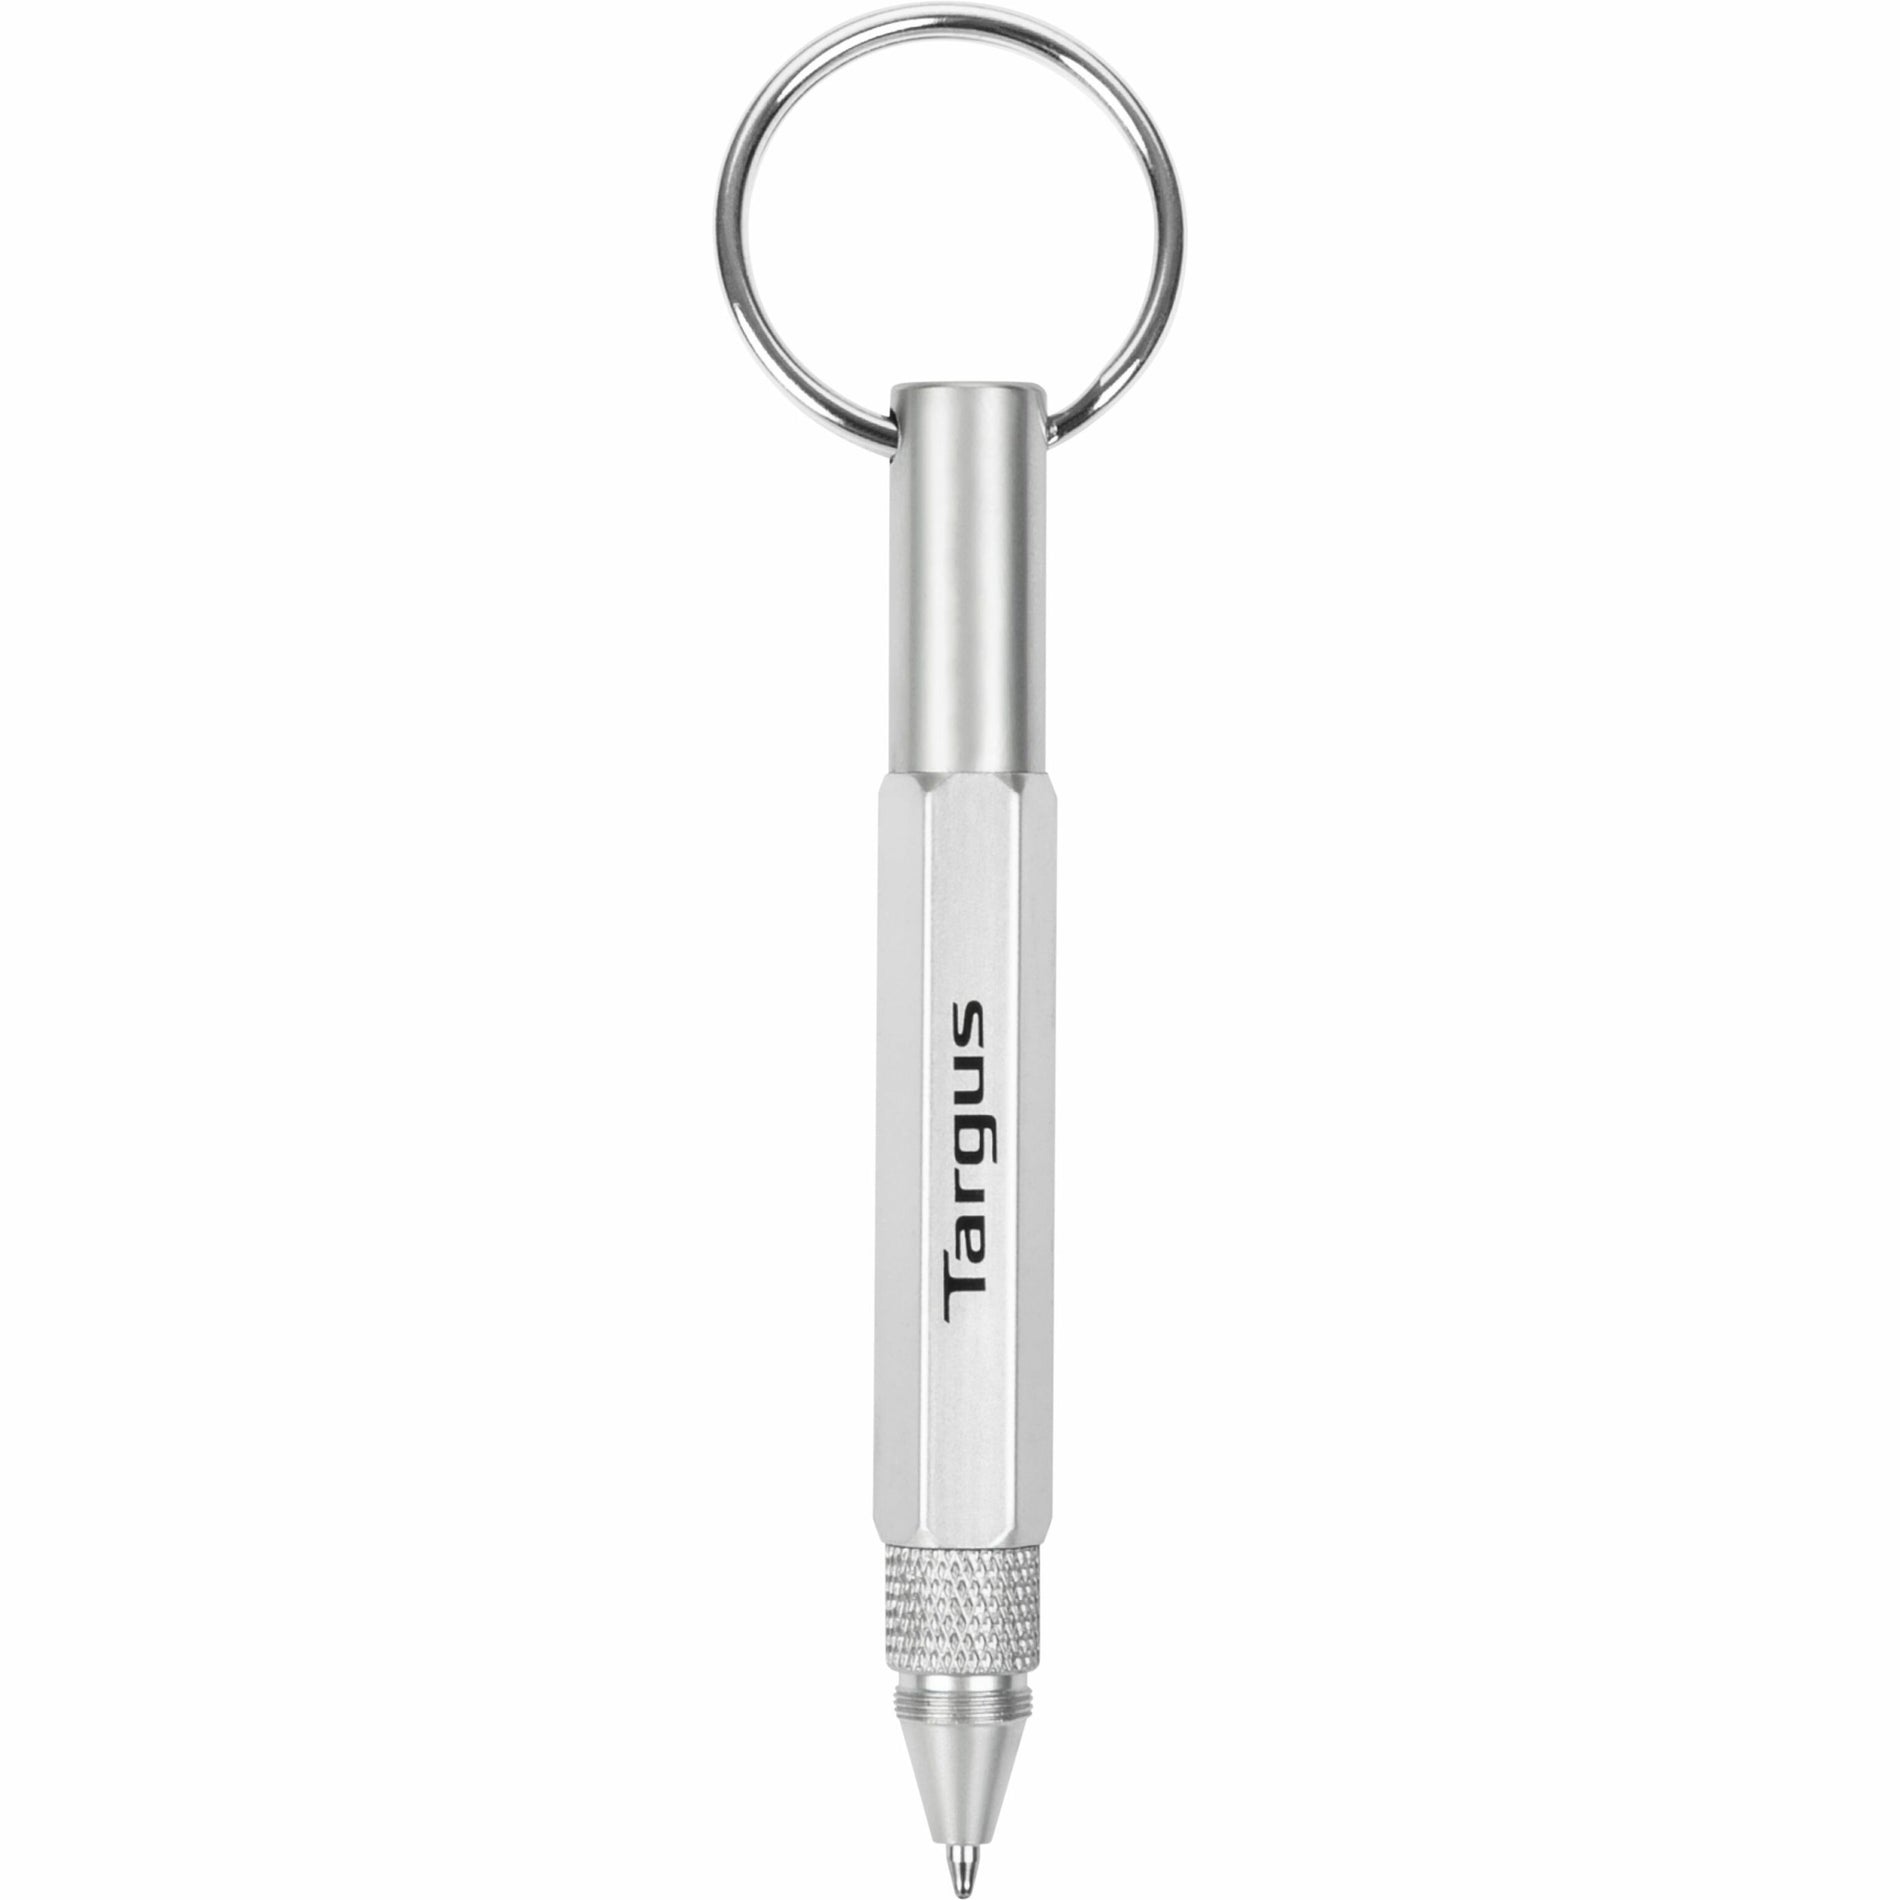 Targus AMM172GL Multi-Tool Keychain Stylus, 1 Year Warranty, Capacitive Touchscreen Supported